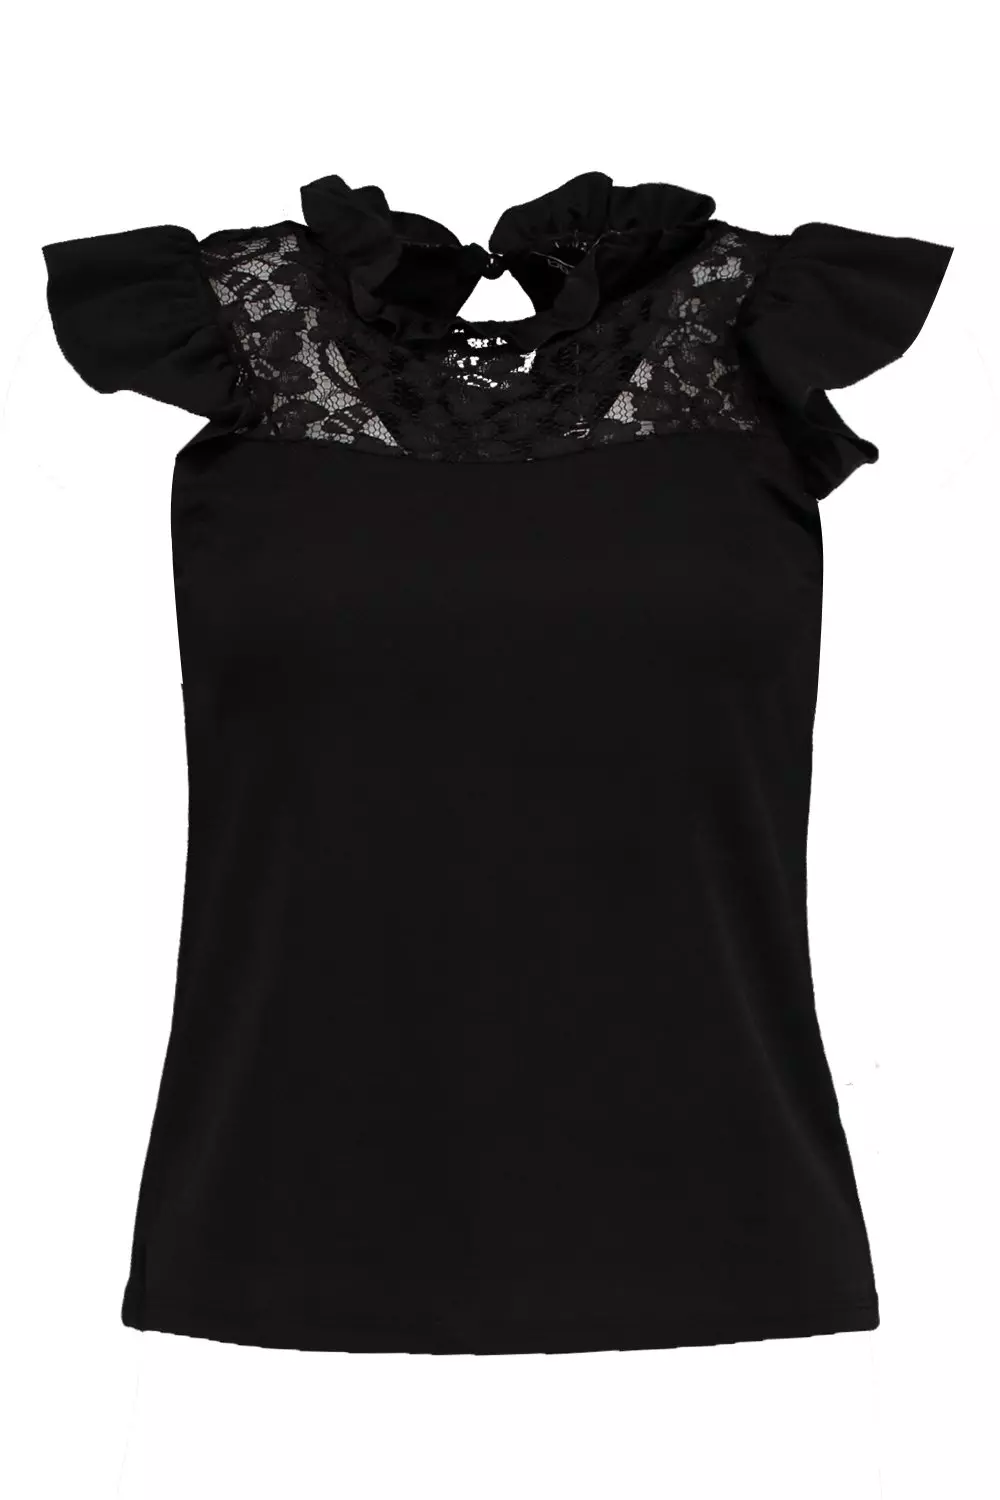 Kayleigh Lace Top